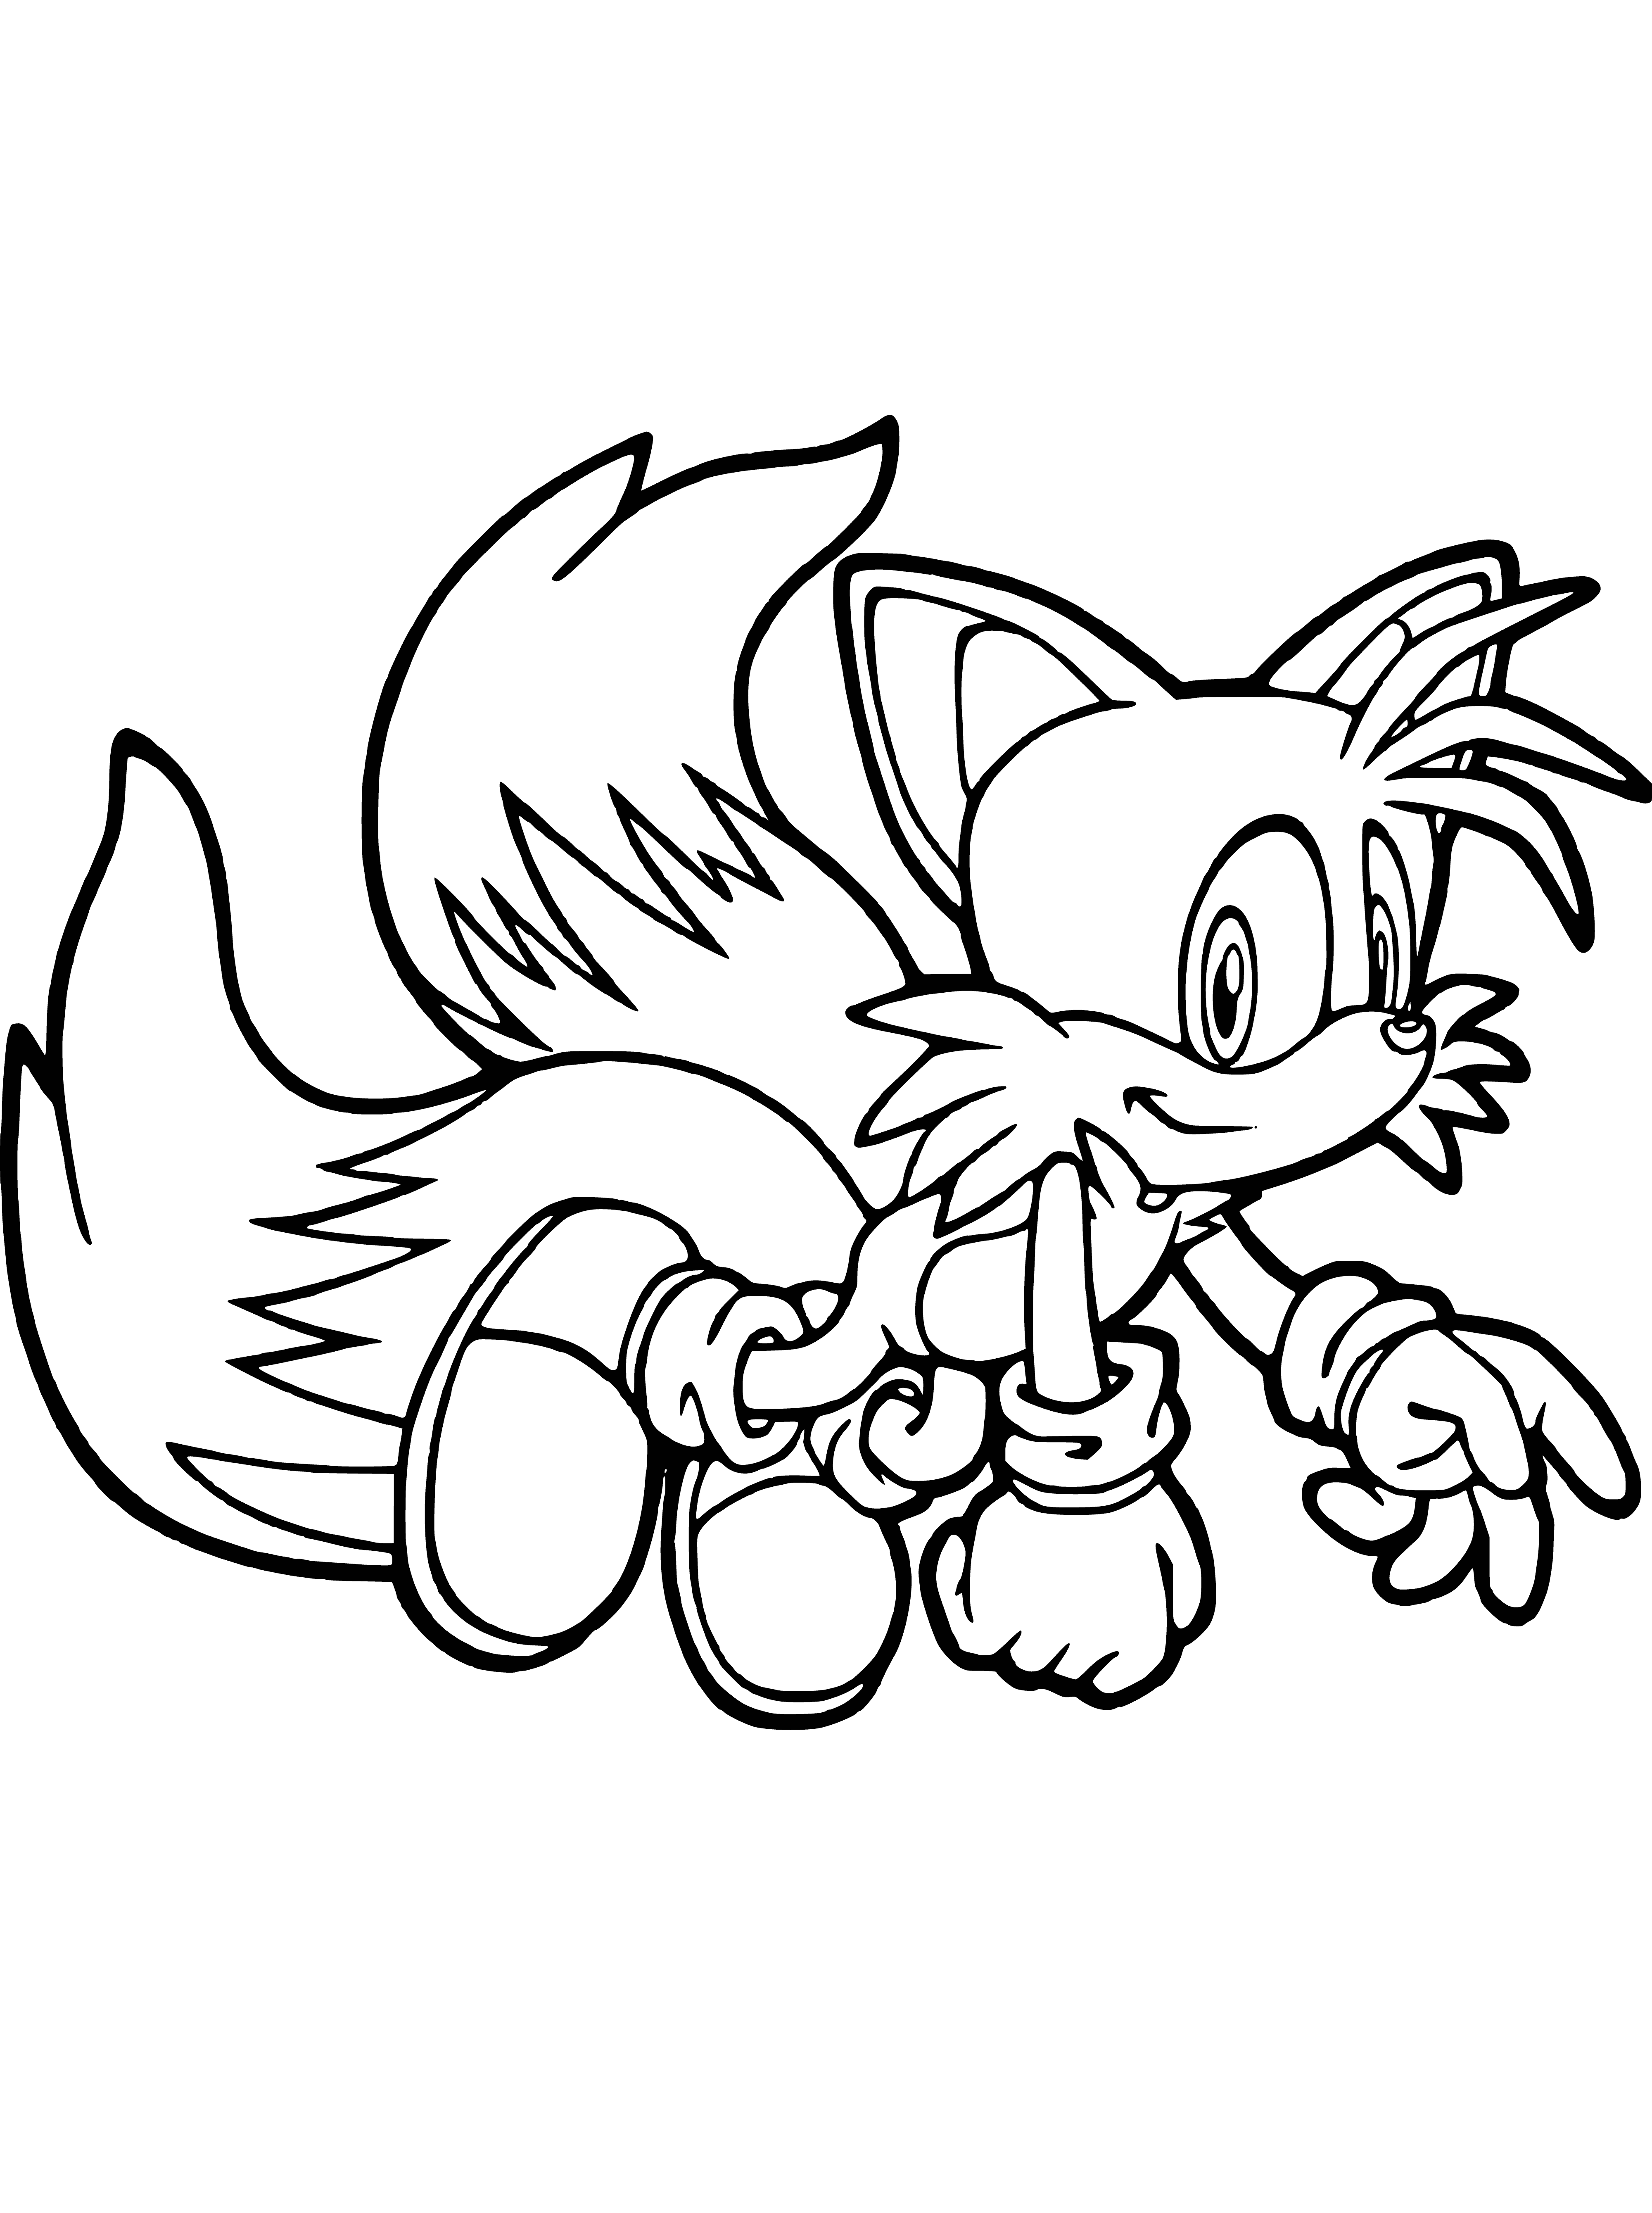 Mails Tails Prower coloring page